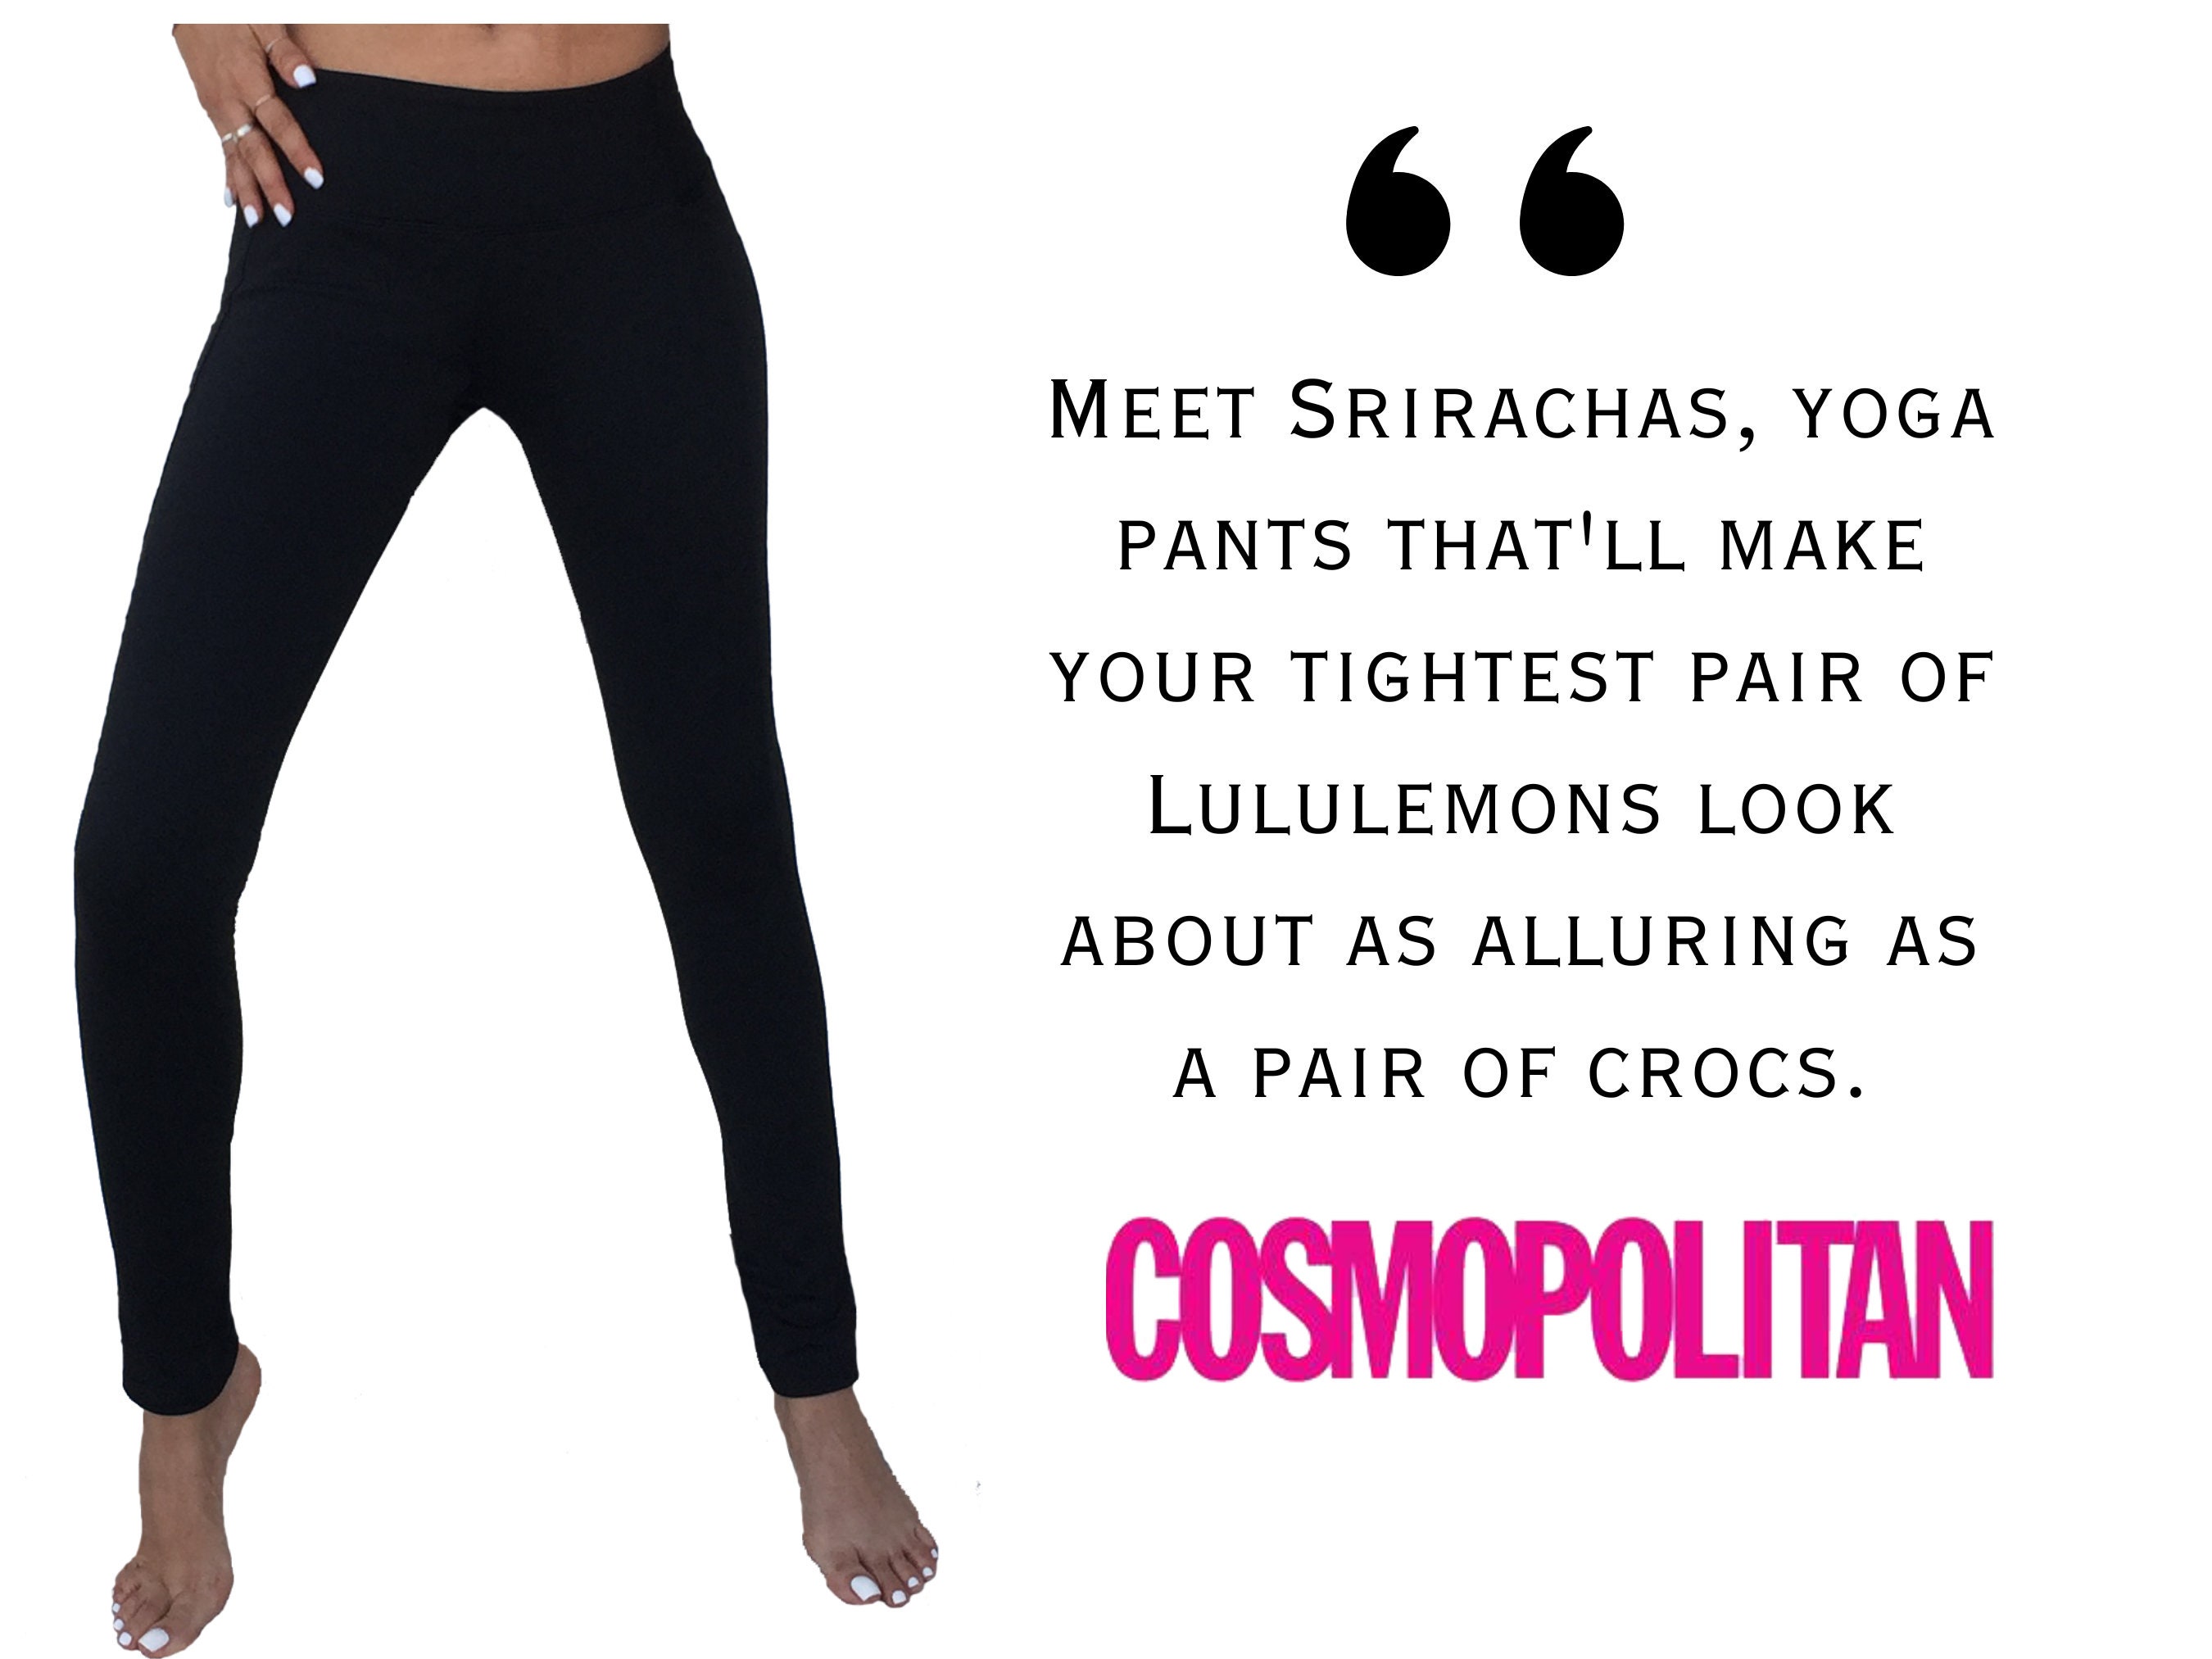 Srirachas Yoga Pant, Flattering and Crotchless, Fun and Sexy Leggings,  Naughty Gift, Hot Adult Date Clothing, Better Than Lingerie, Romantic -   Norway